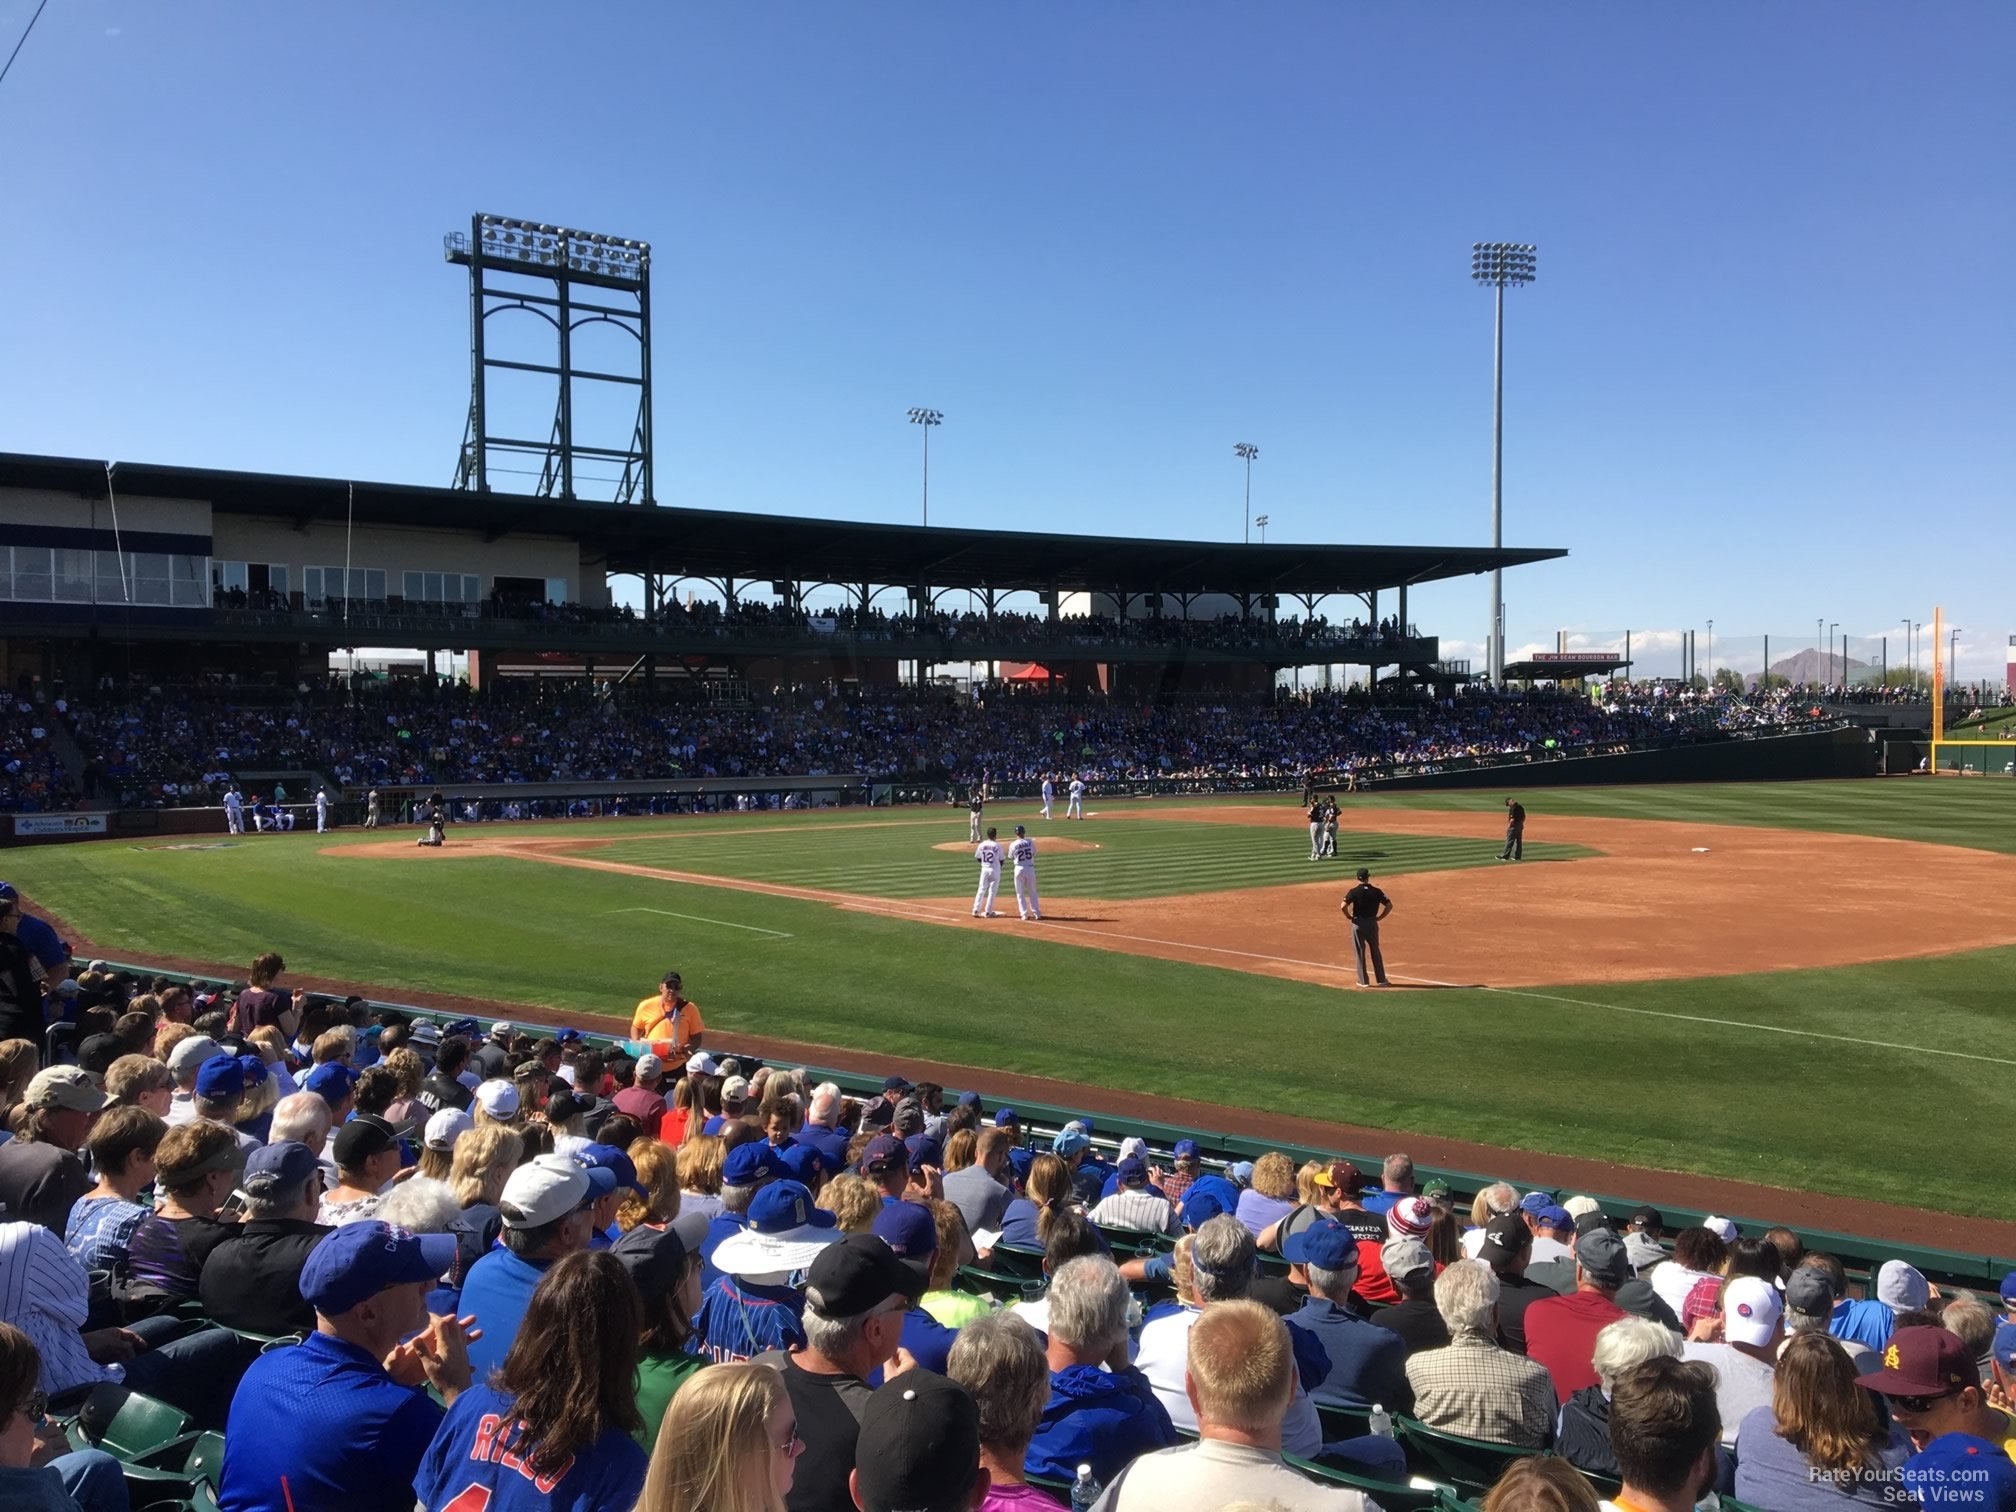 section 118, row 12 seat view  - sloan park